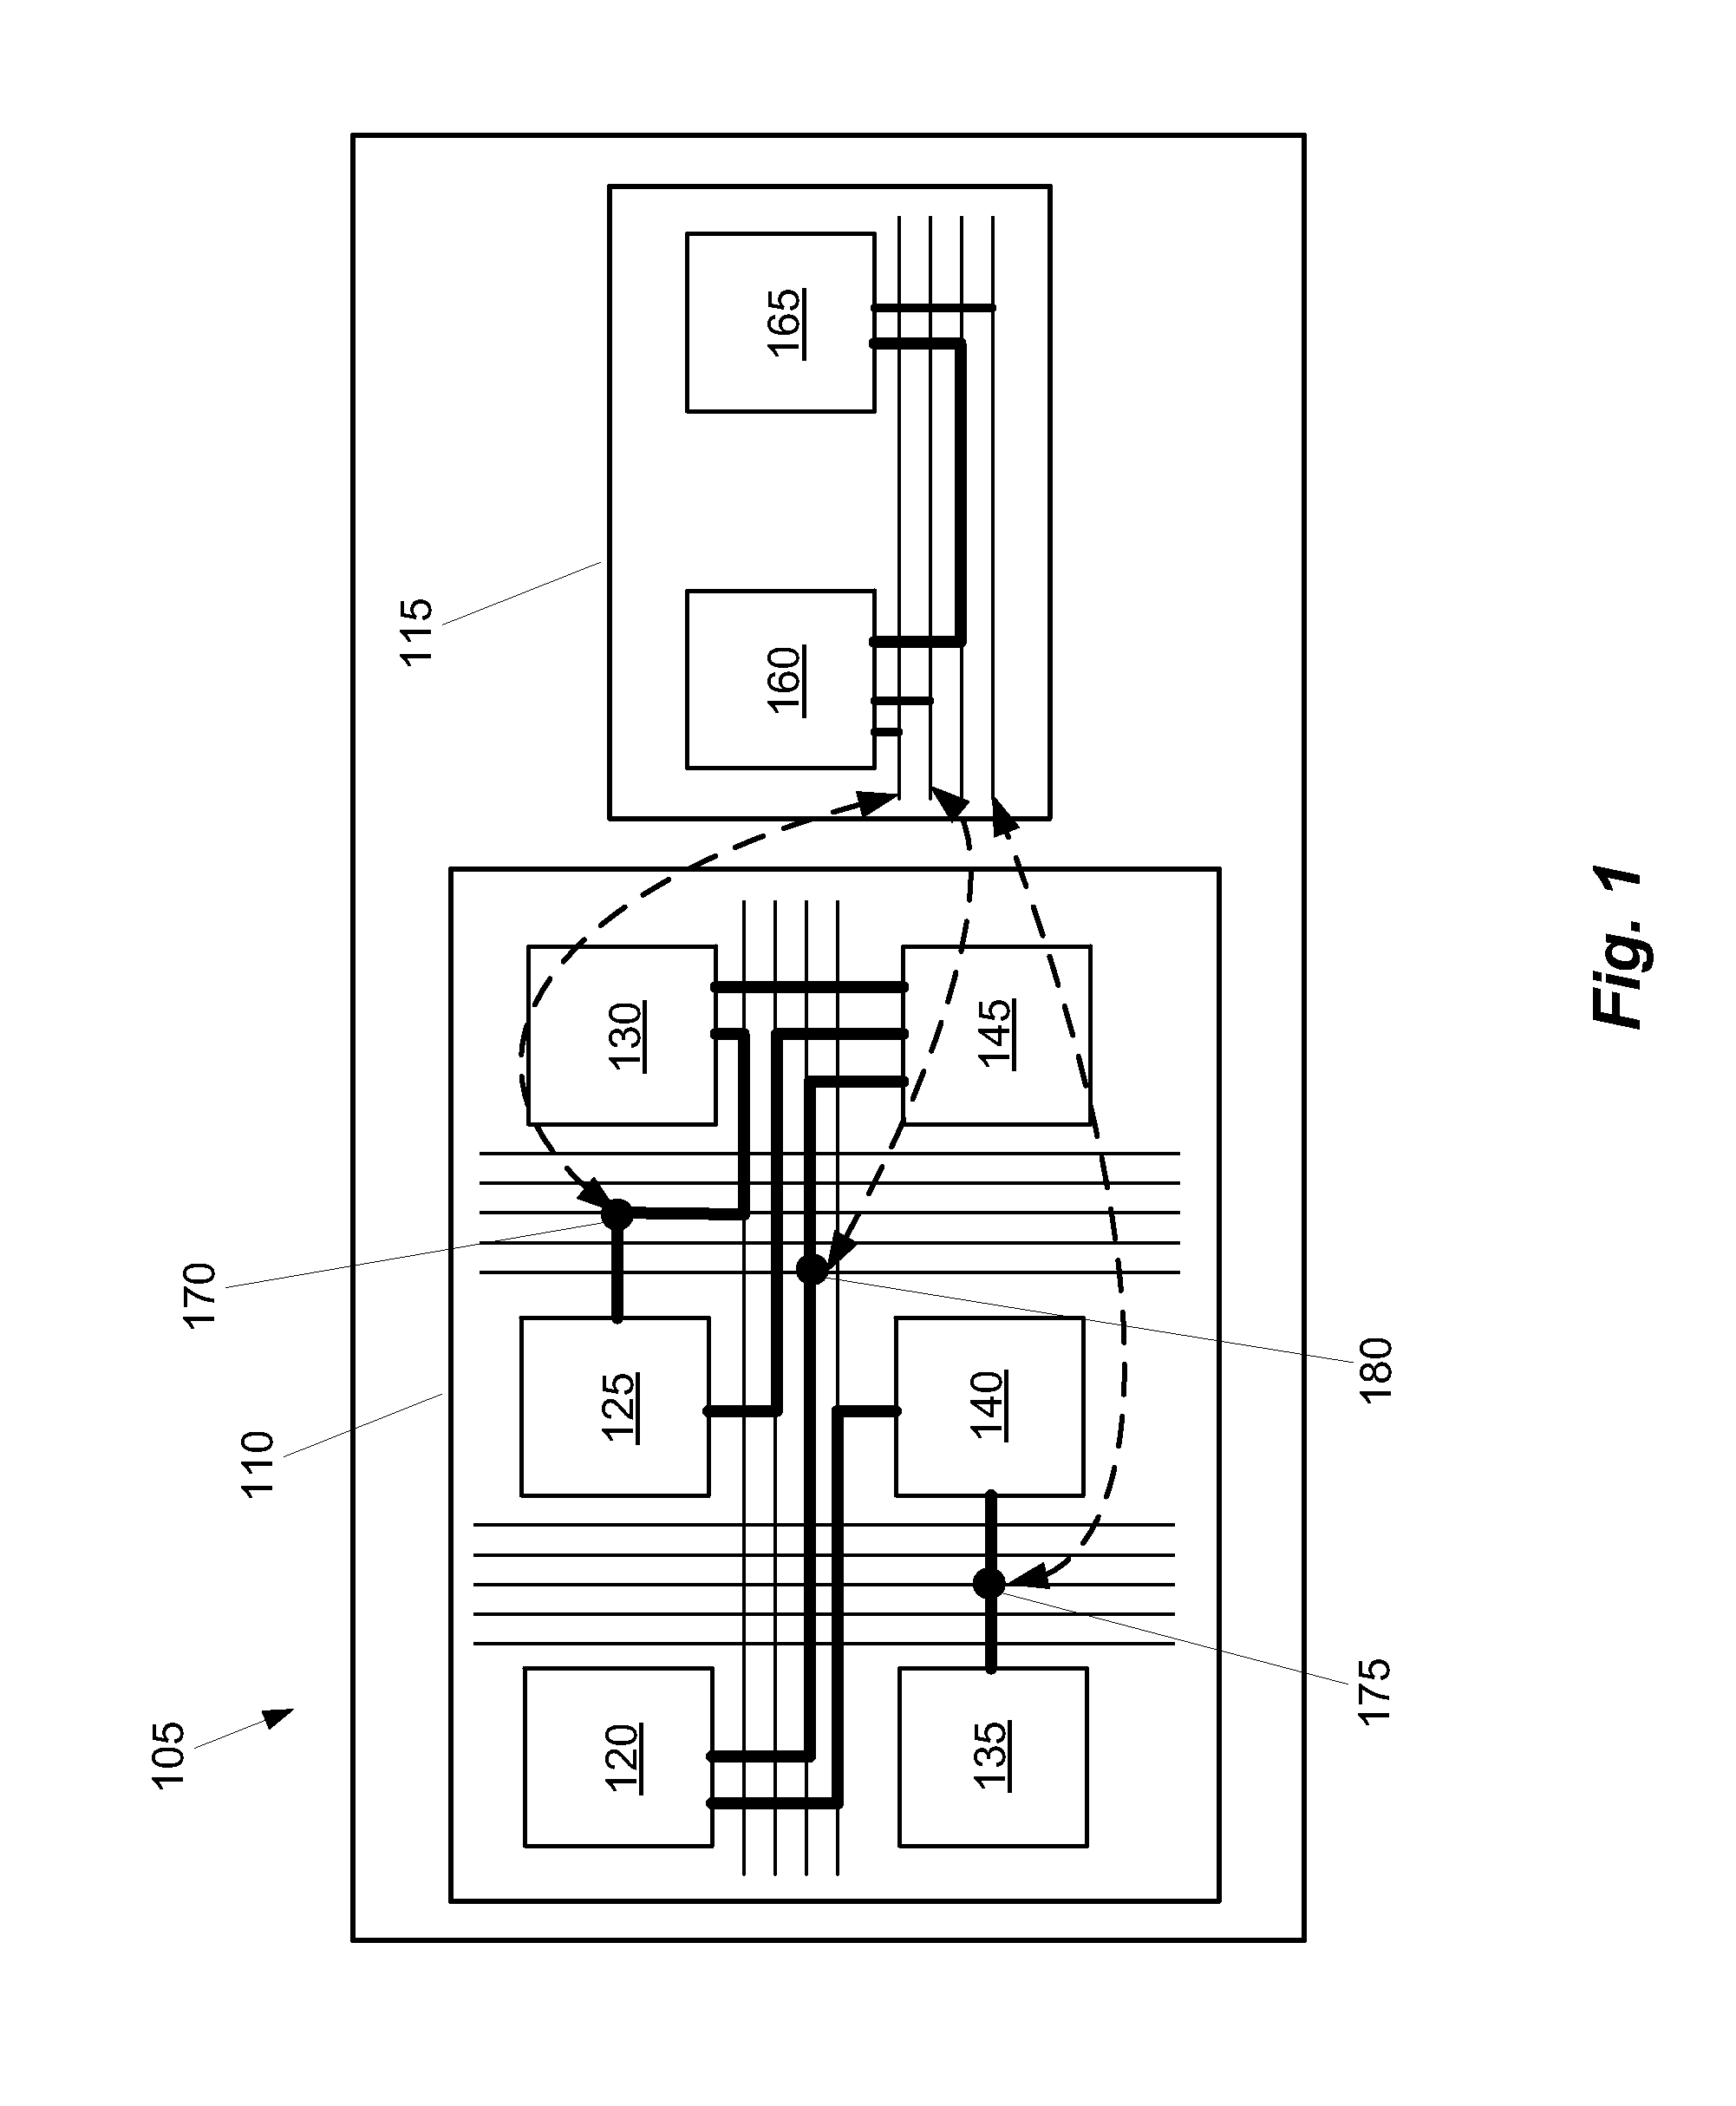 Trigger circuits and event counters for an IC